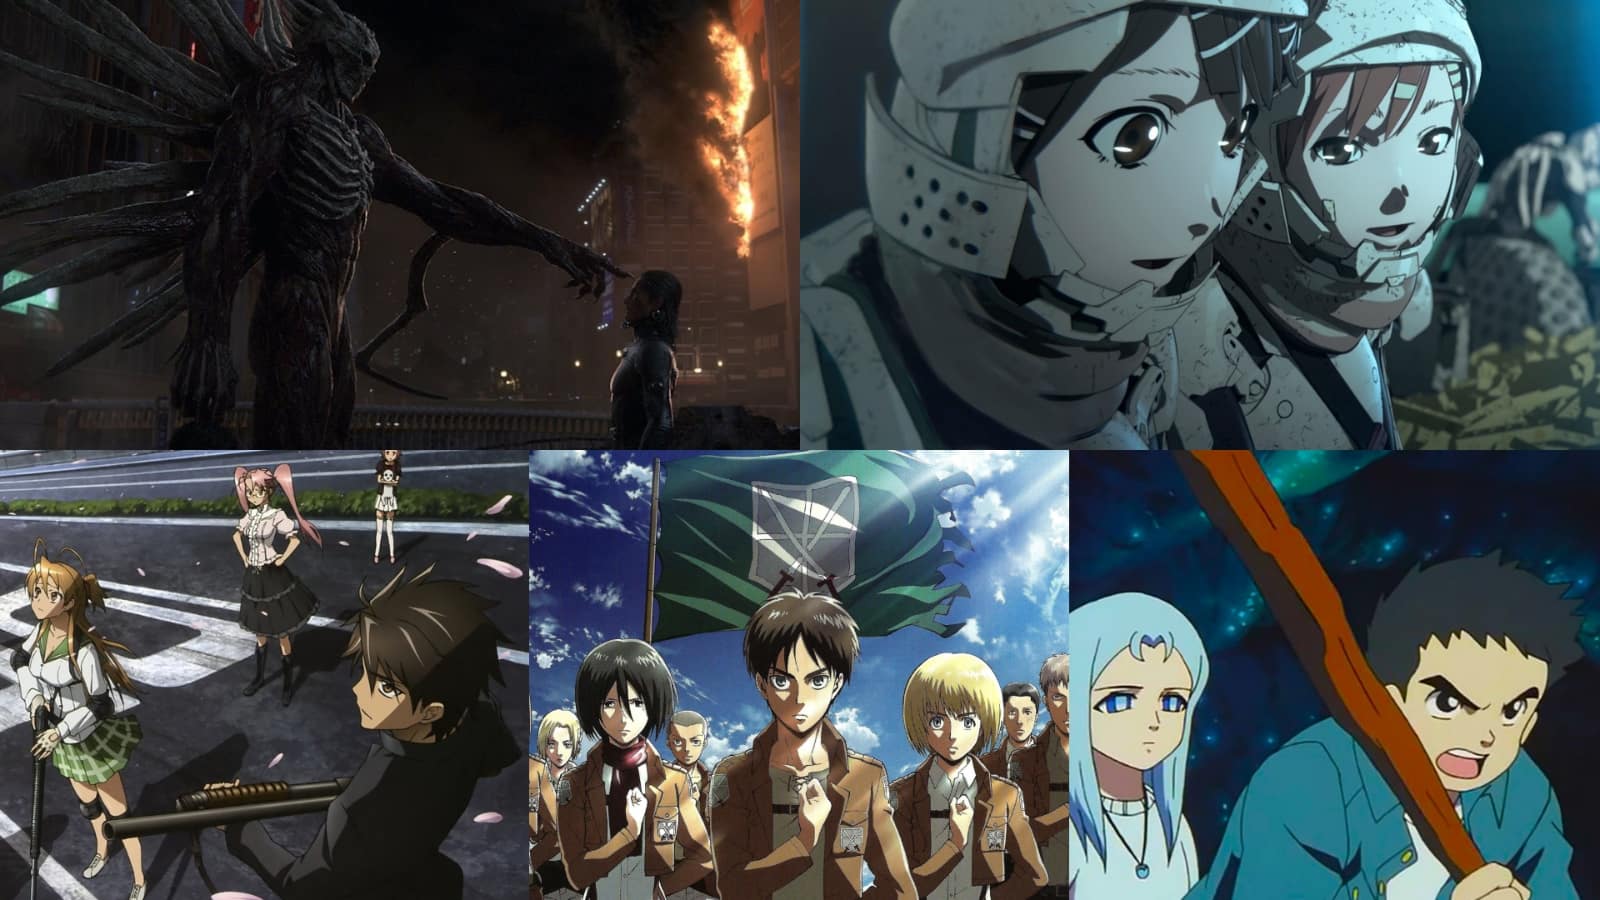 Post Apocalyptic Anime to Watch While Social Distancing